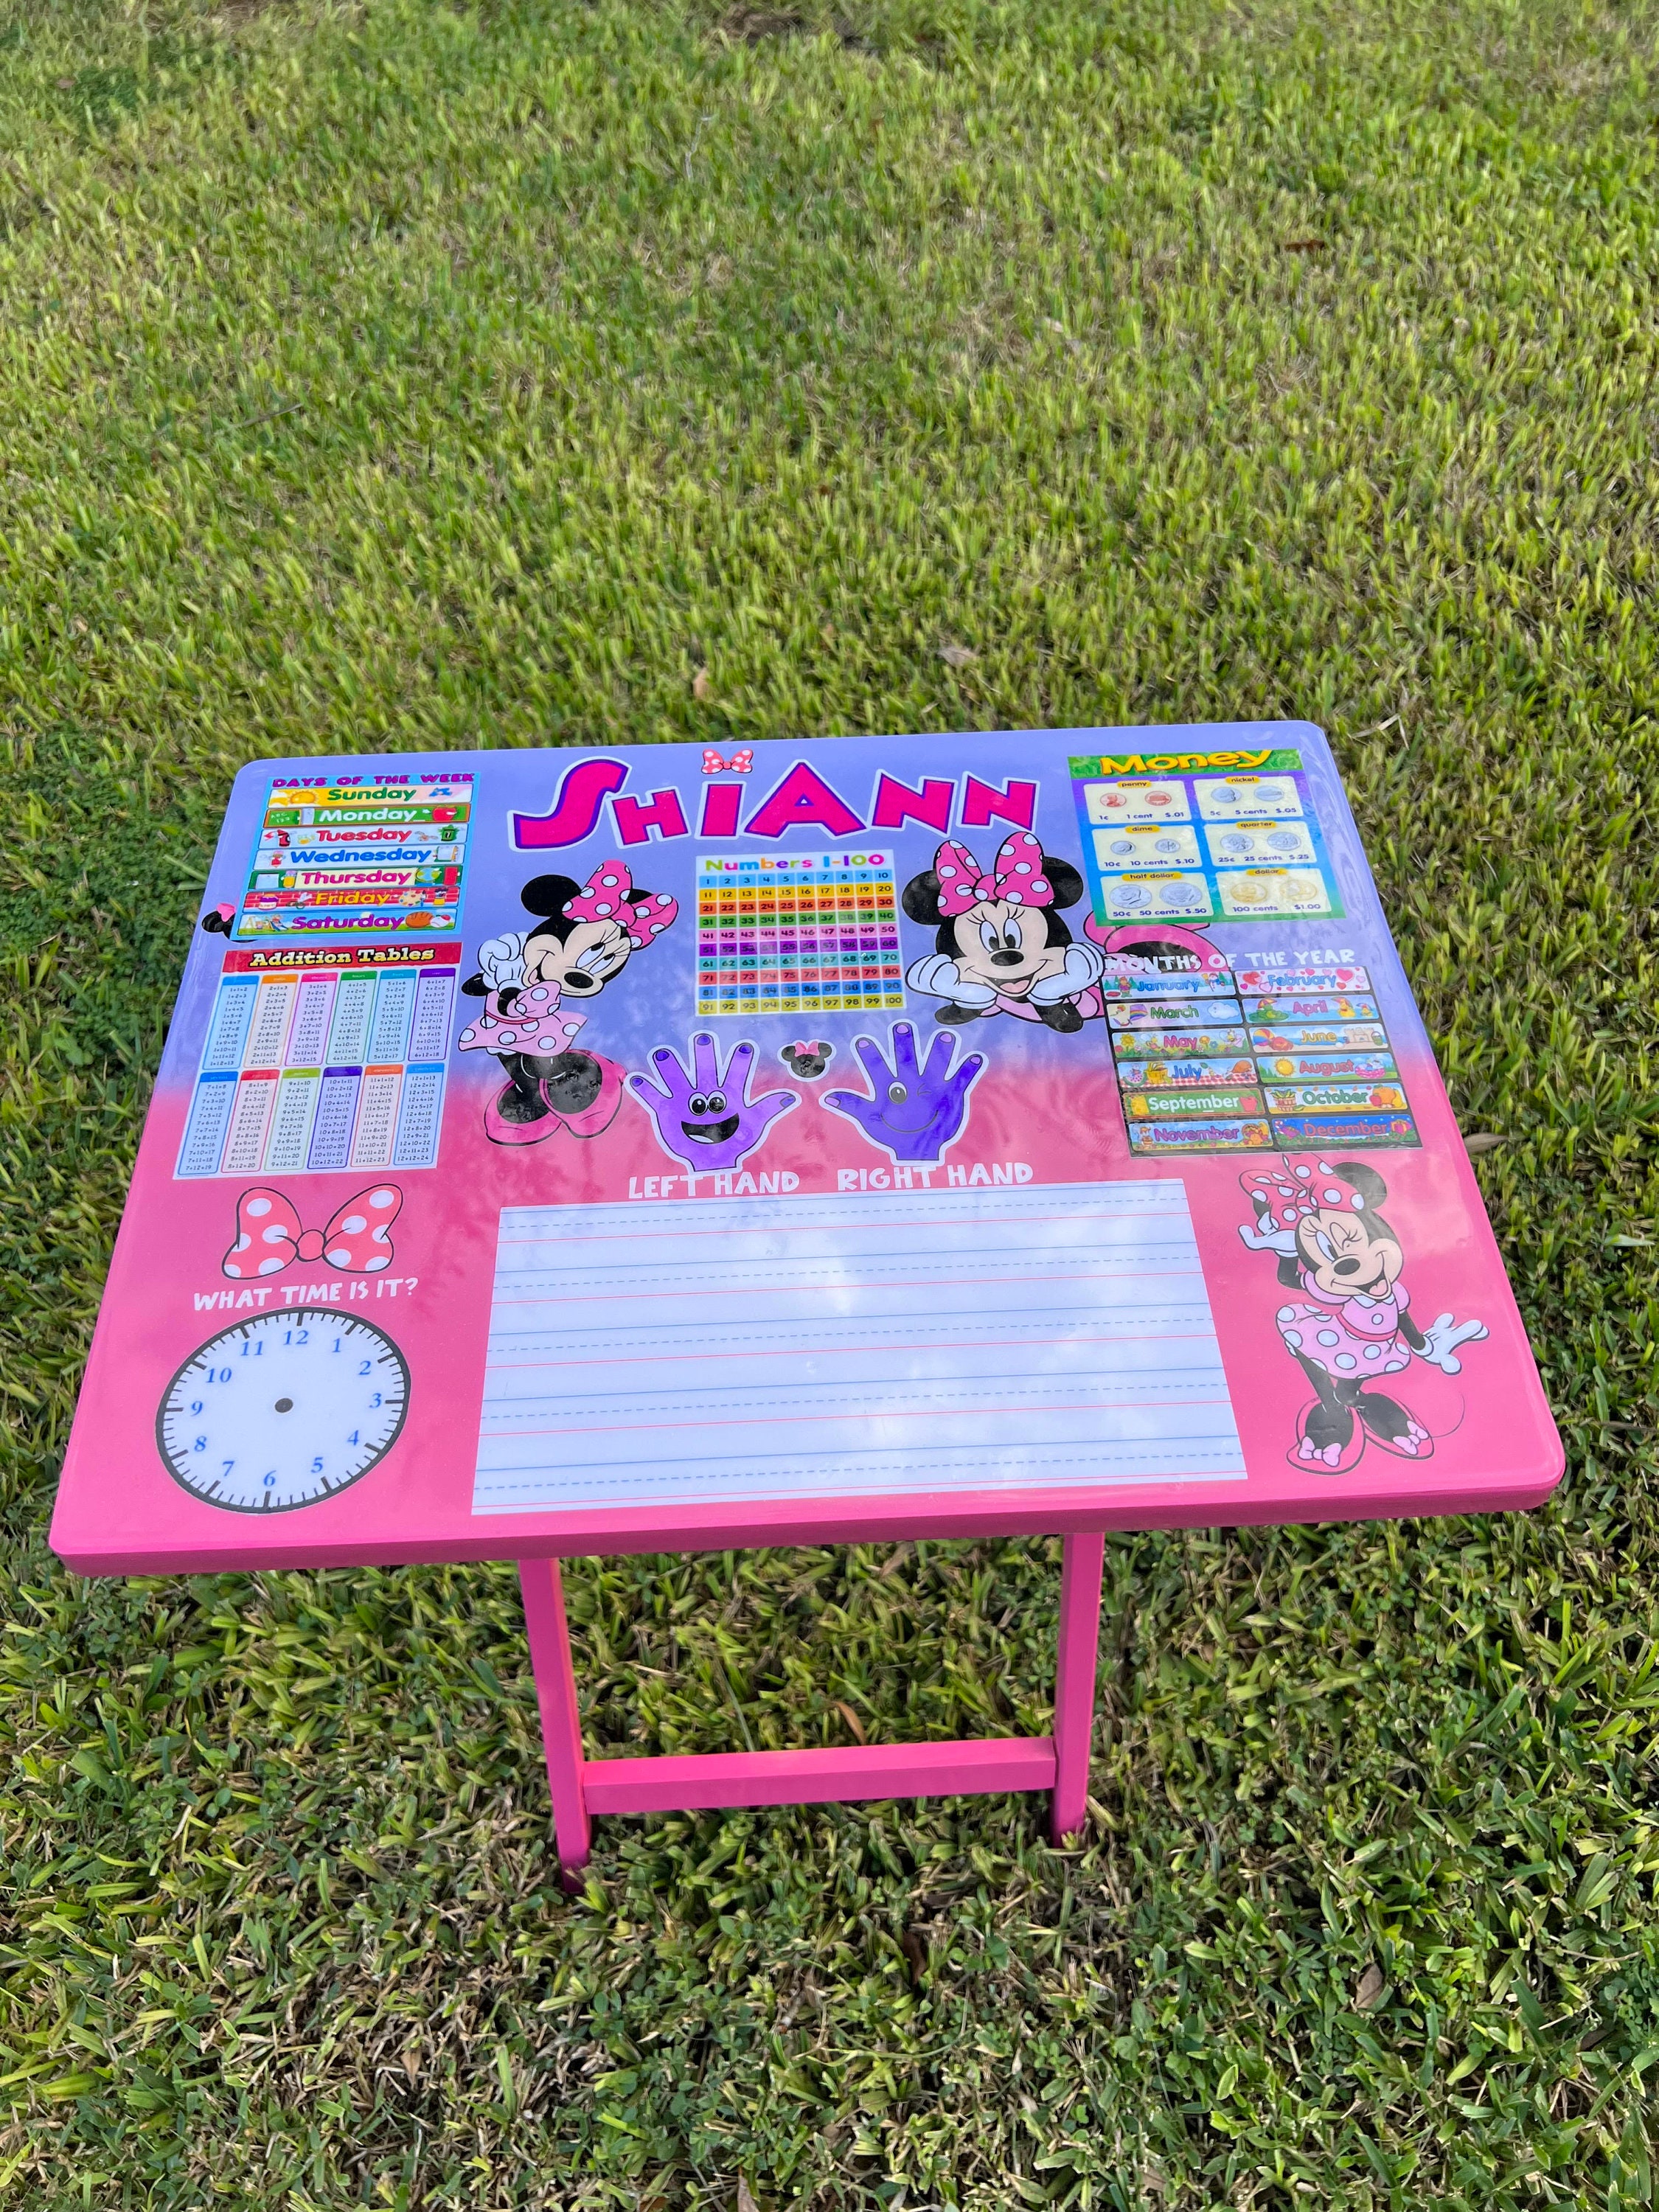 Folding Tray Table Learning Table Custom TV Tray Kids Learning Table Gifts  for Kids 